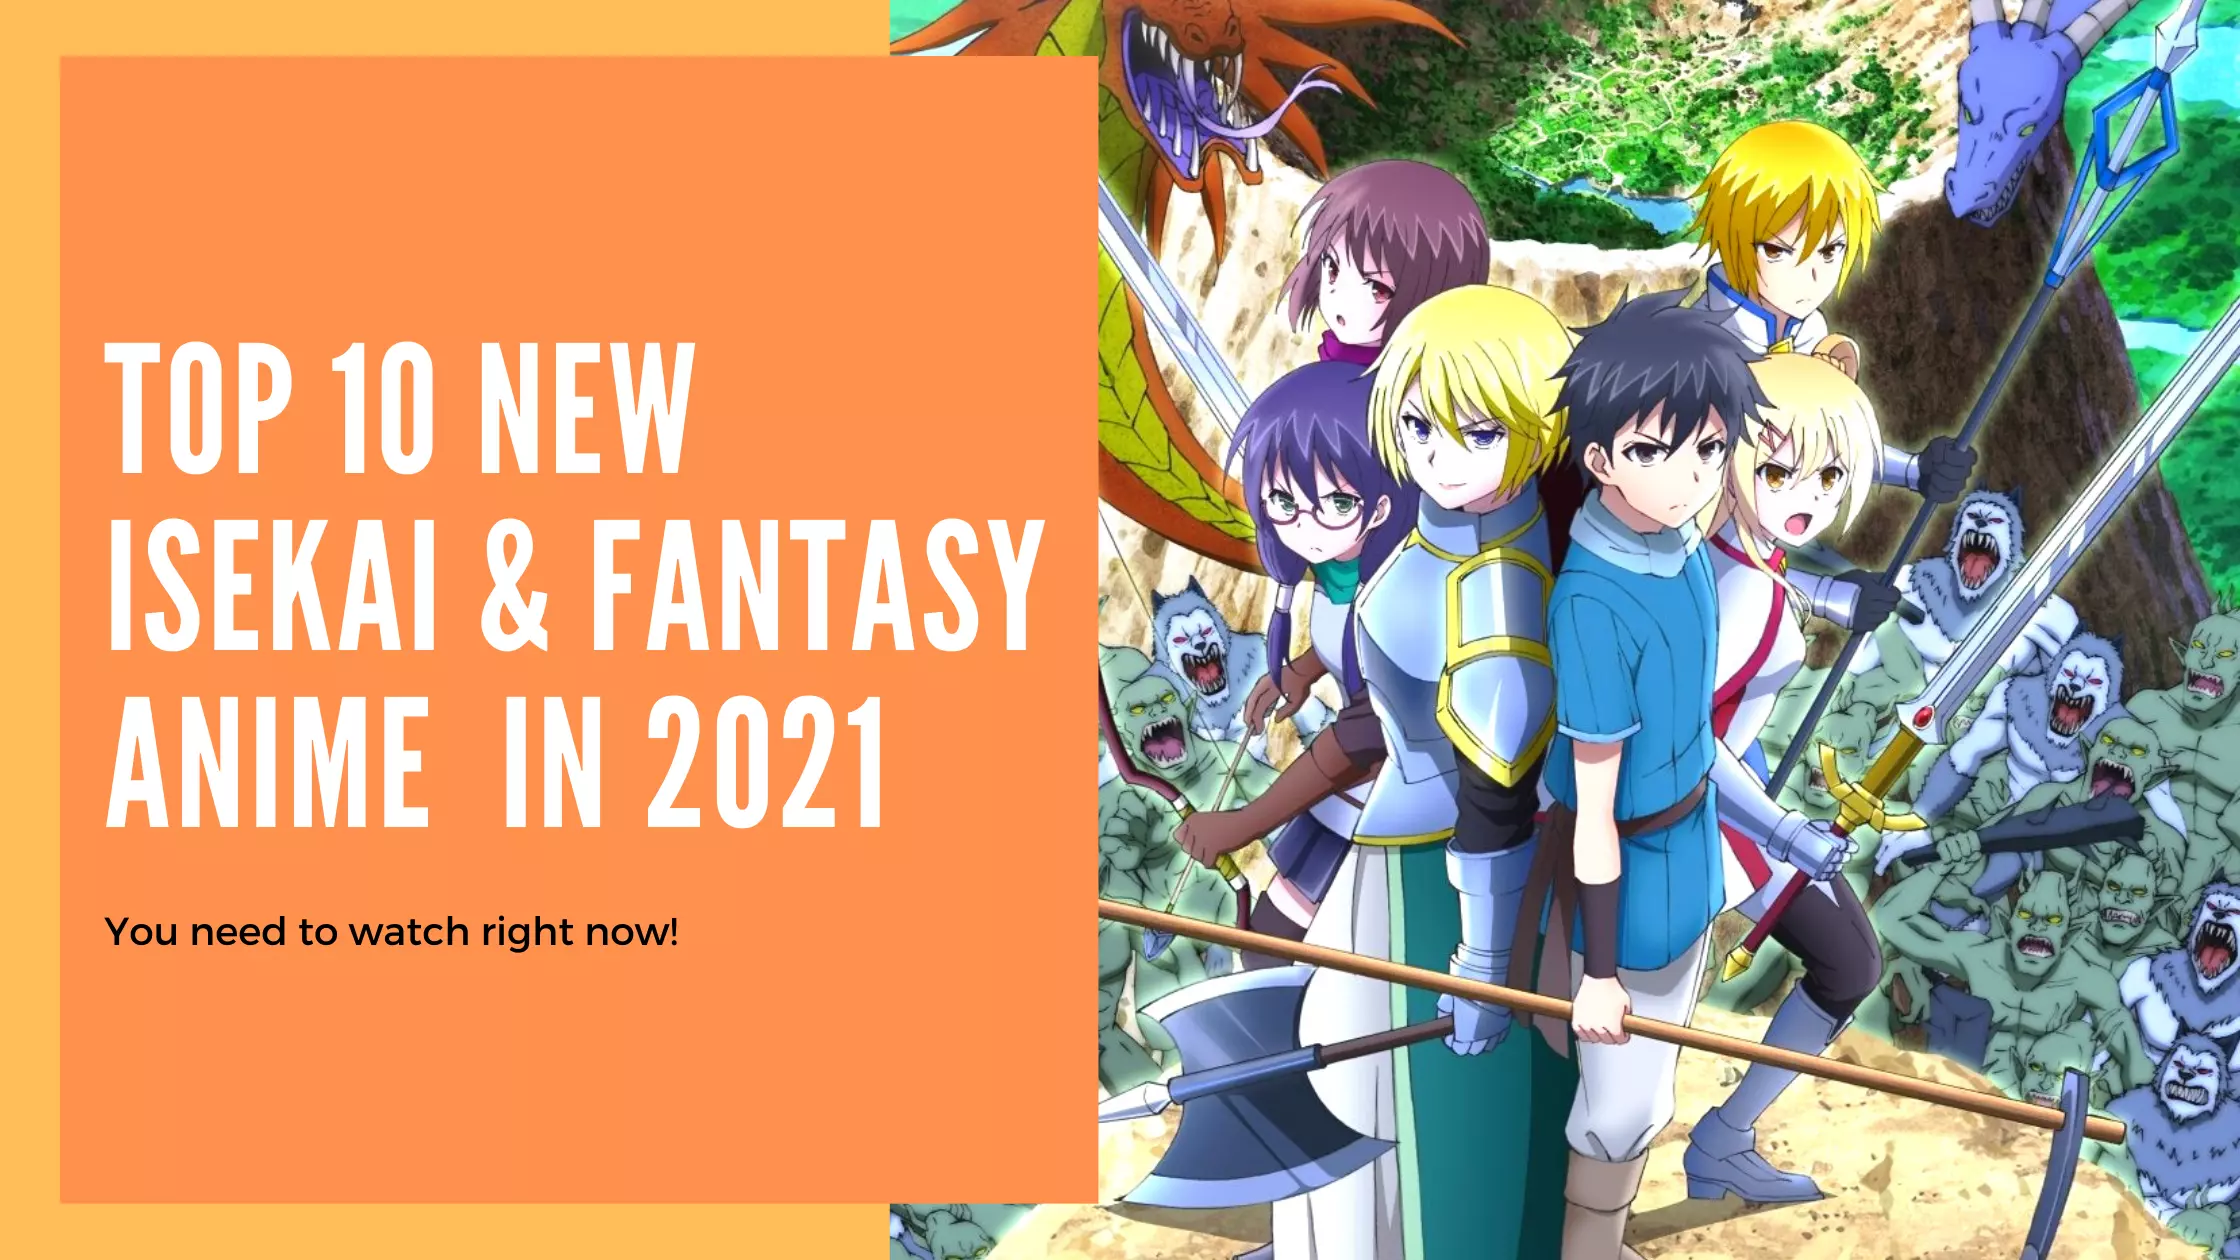 Top 10 New Isekai & Fantasy Anime You Need To Watch In 2021! - Anime Mantra